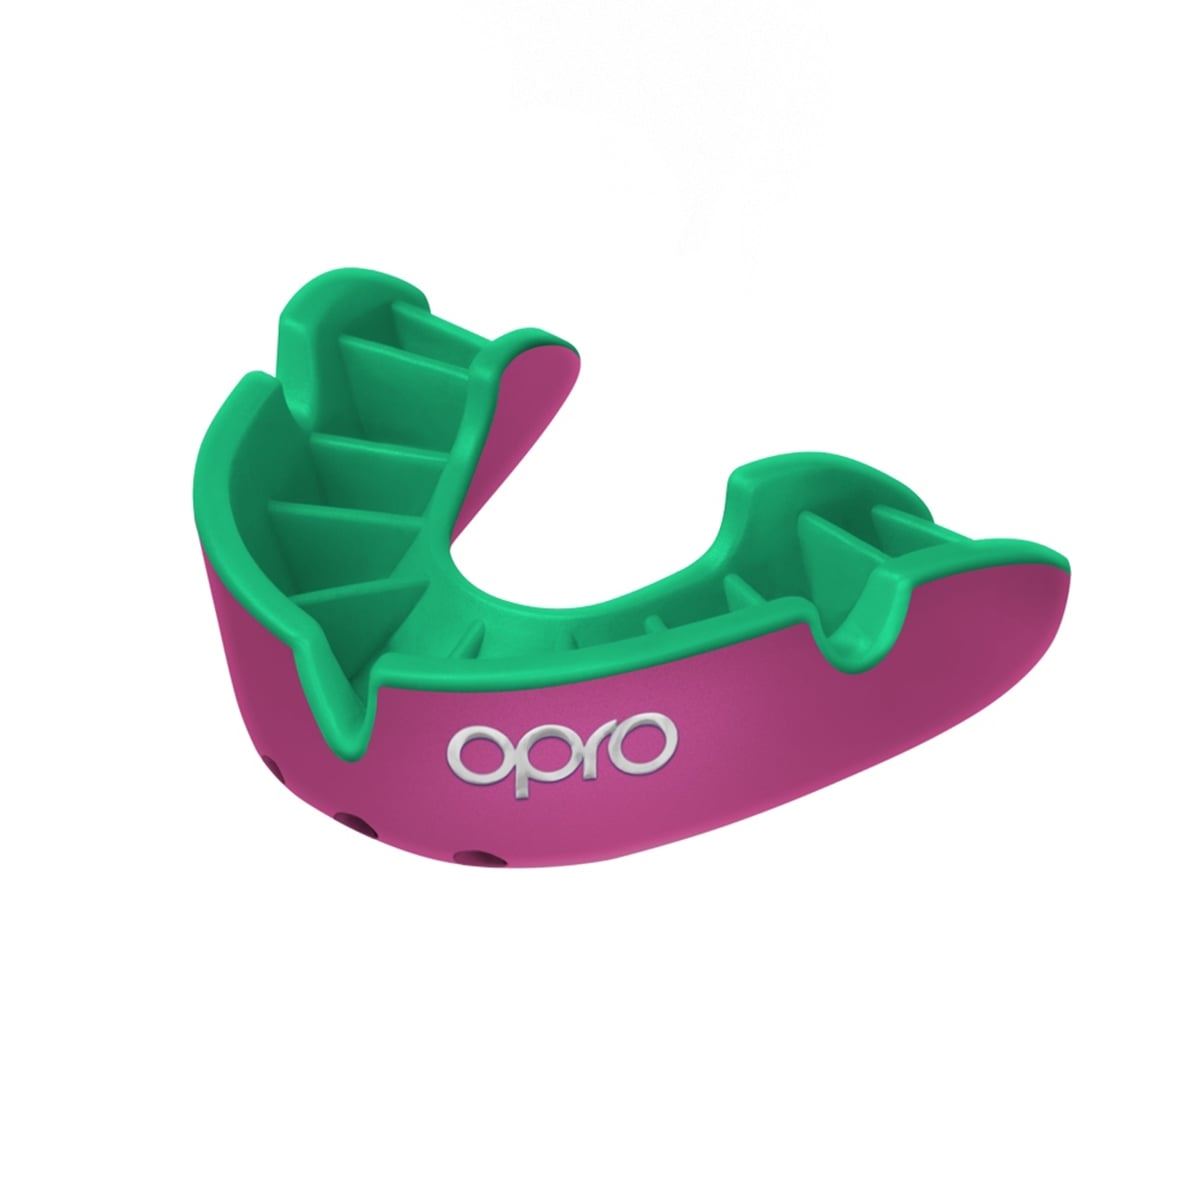 Men's Rugby Protective Mouthguard OPRO Self-Fit Silver 2022 Pink/Green